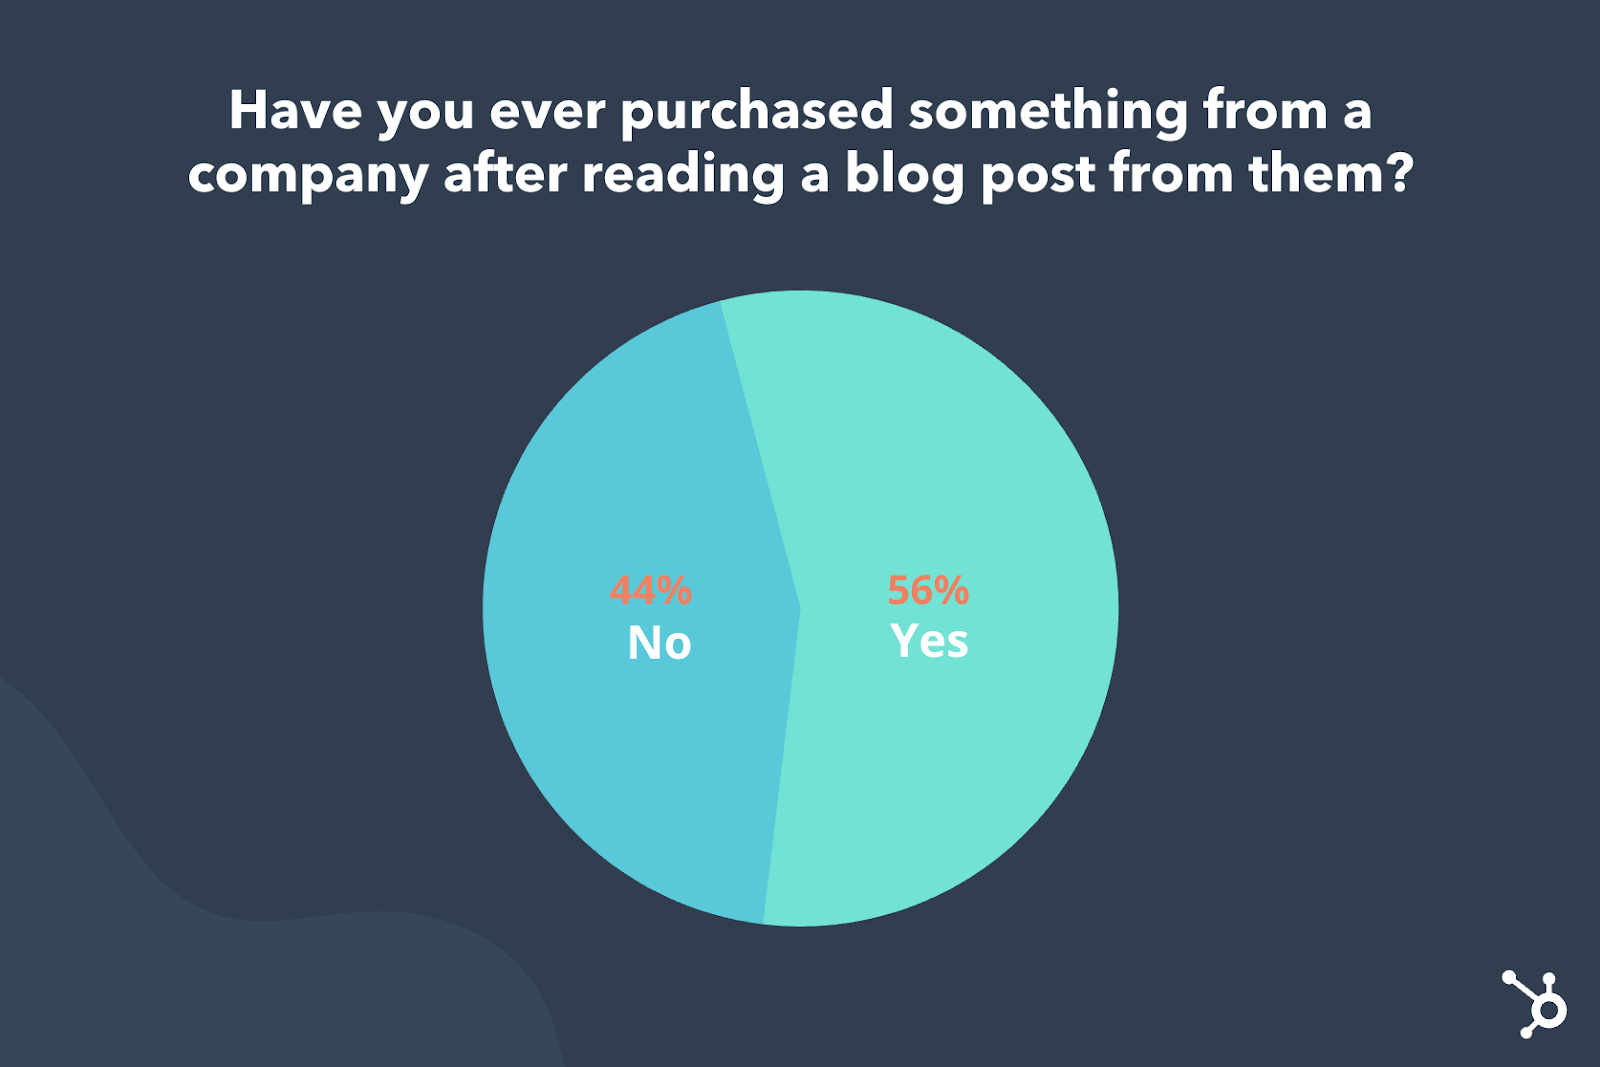 percentage of people who've bought something after reading a blog is 56%